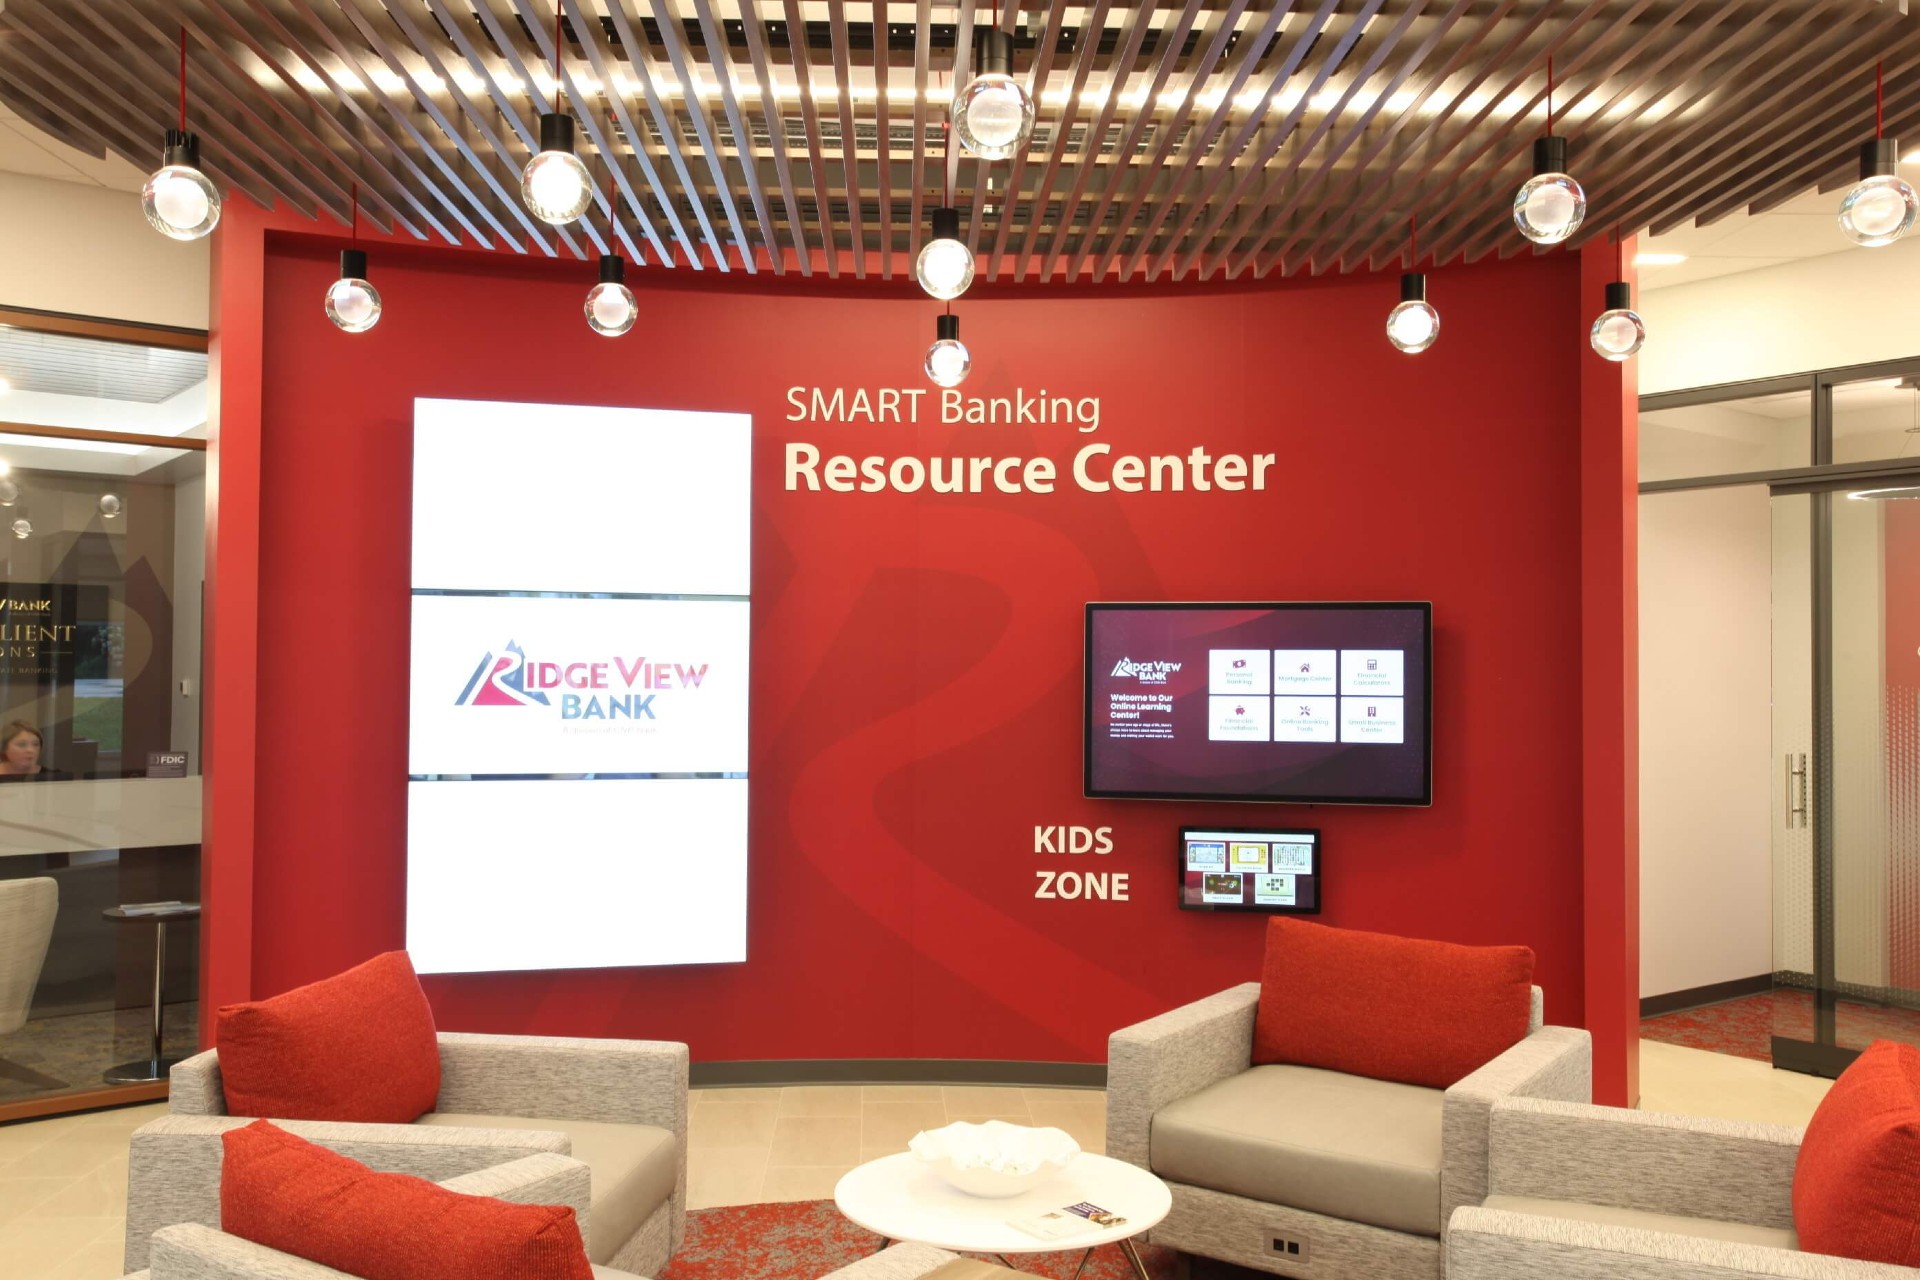 A modern interactive banking resource center with digital screens and a comfortable waiting area at Ridge View Bank.